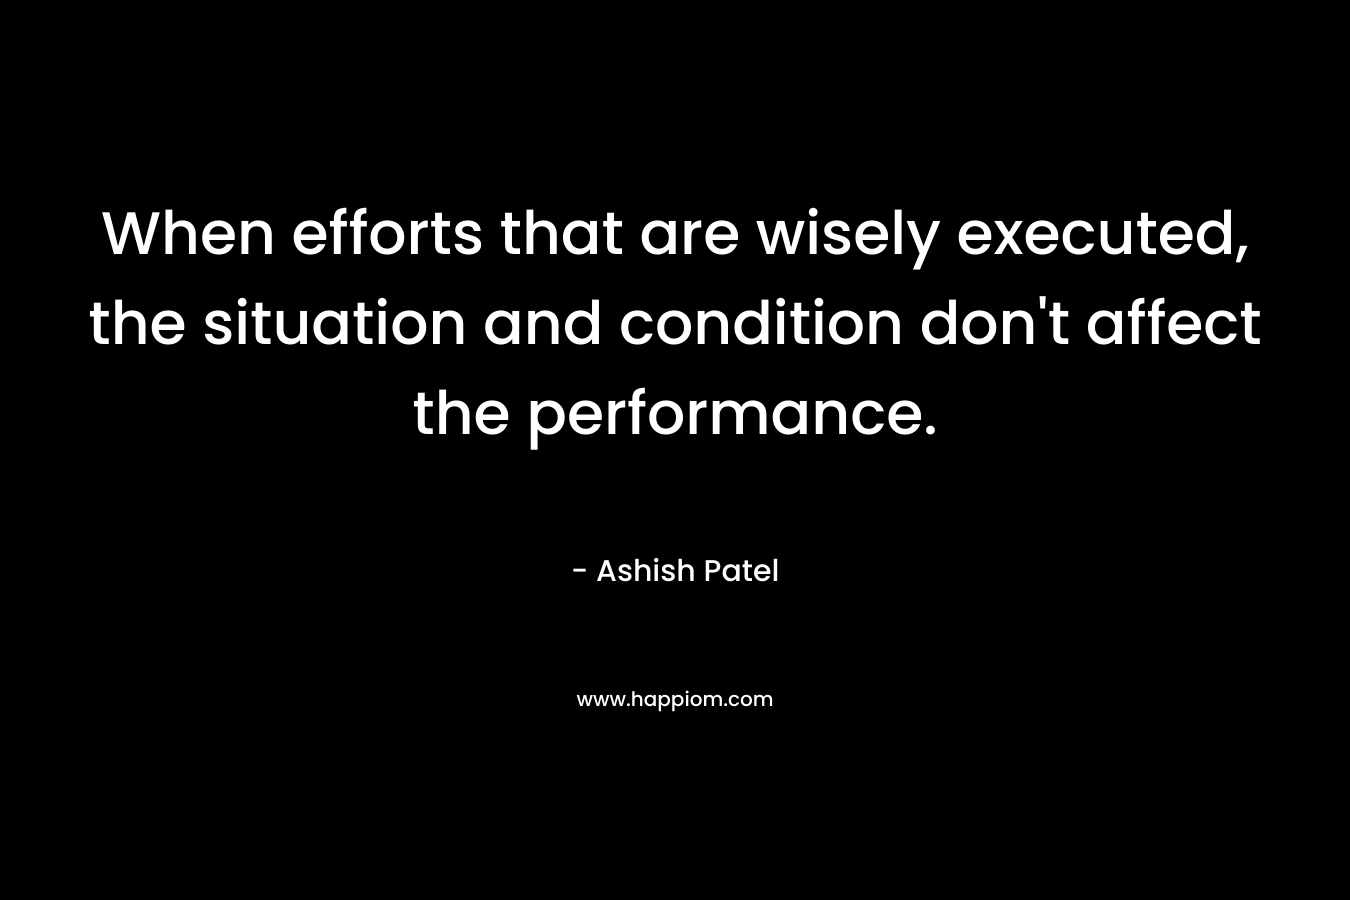 When efforts that are wisely executed, the situation and condition don’t affect the performance. – Ashish Patel